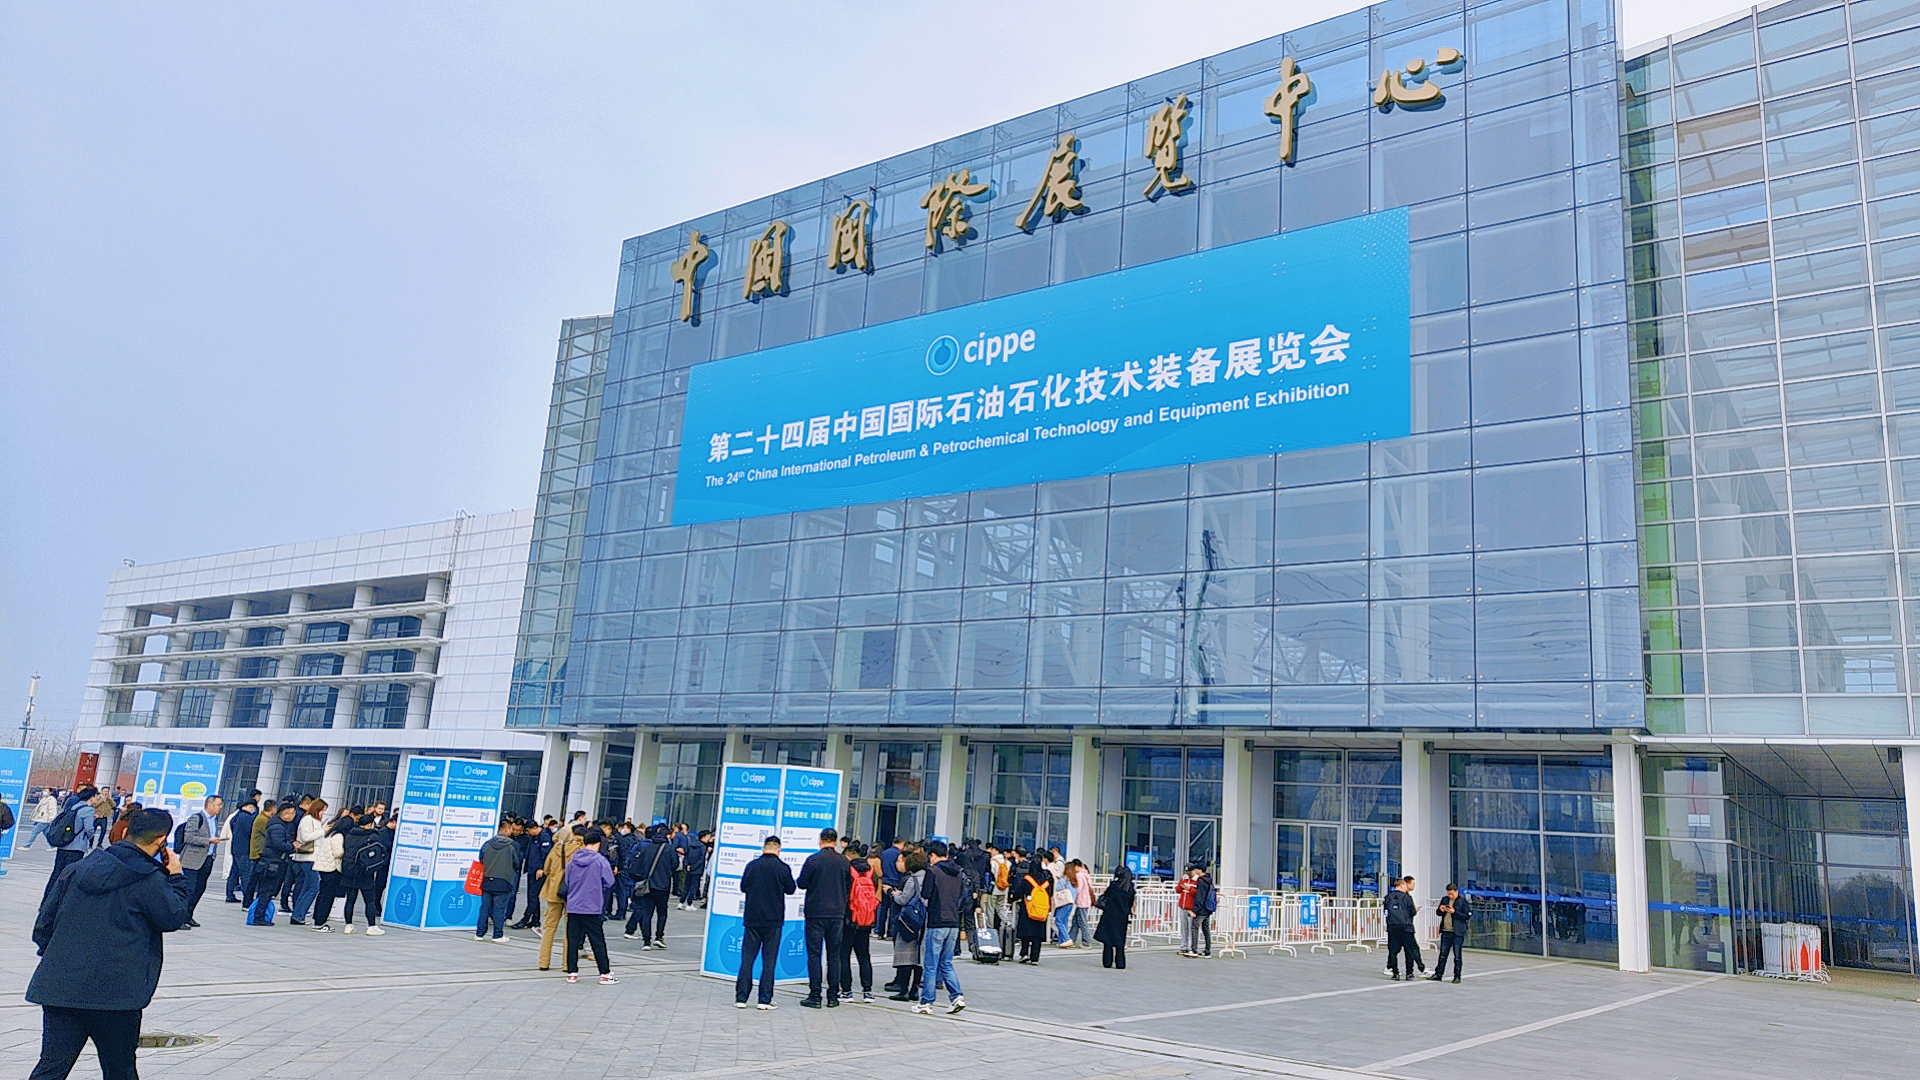 The 25th China International Petroleum & Petrochemical Technology and Equipment Exhibition